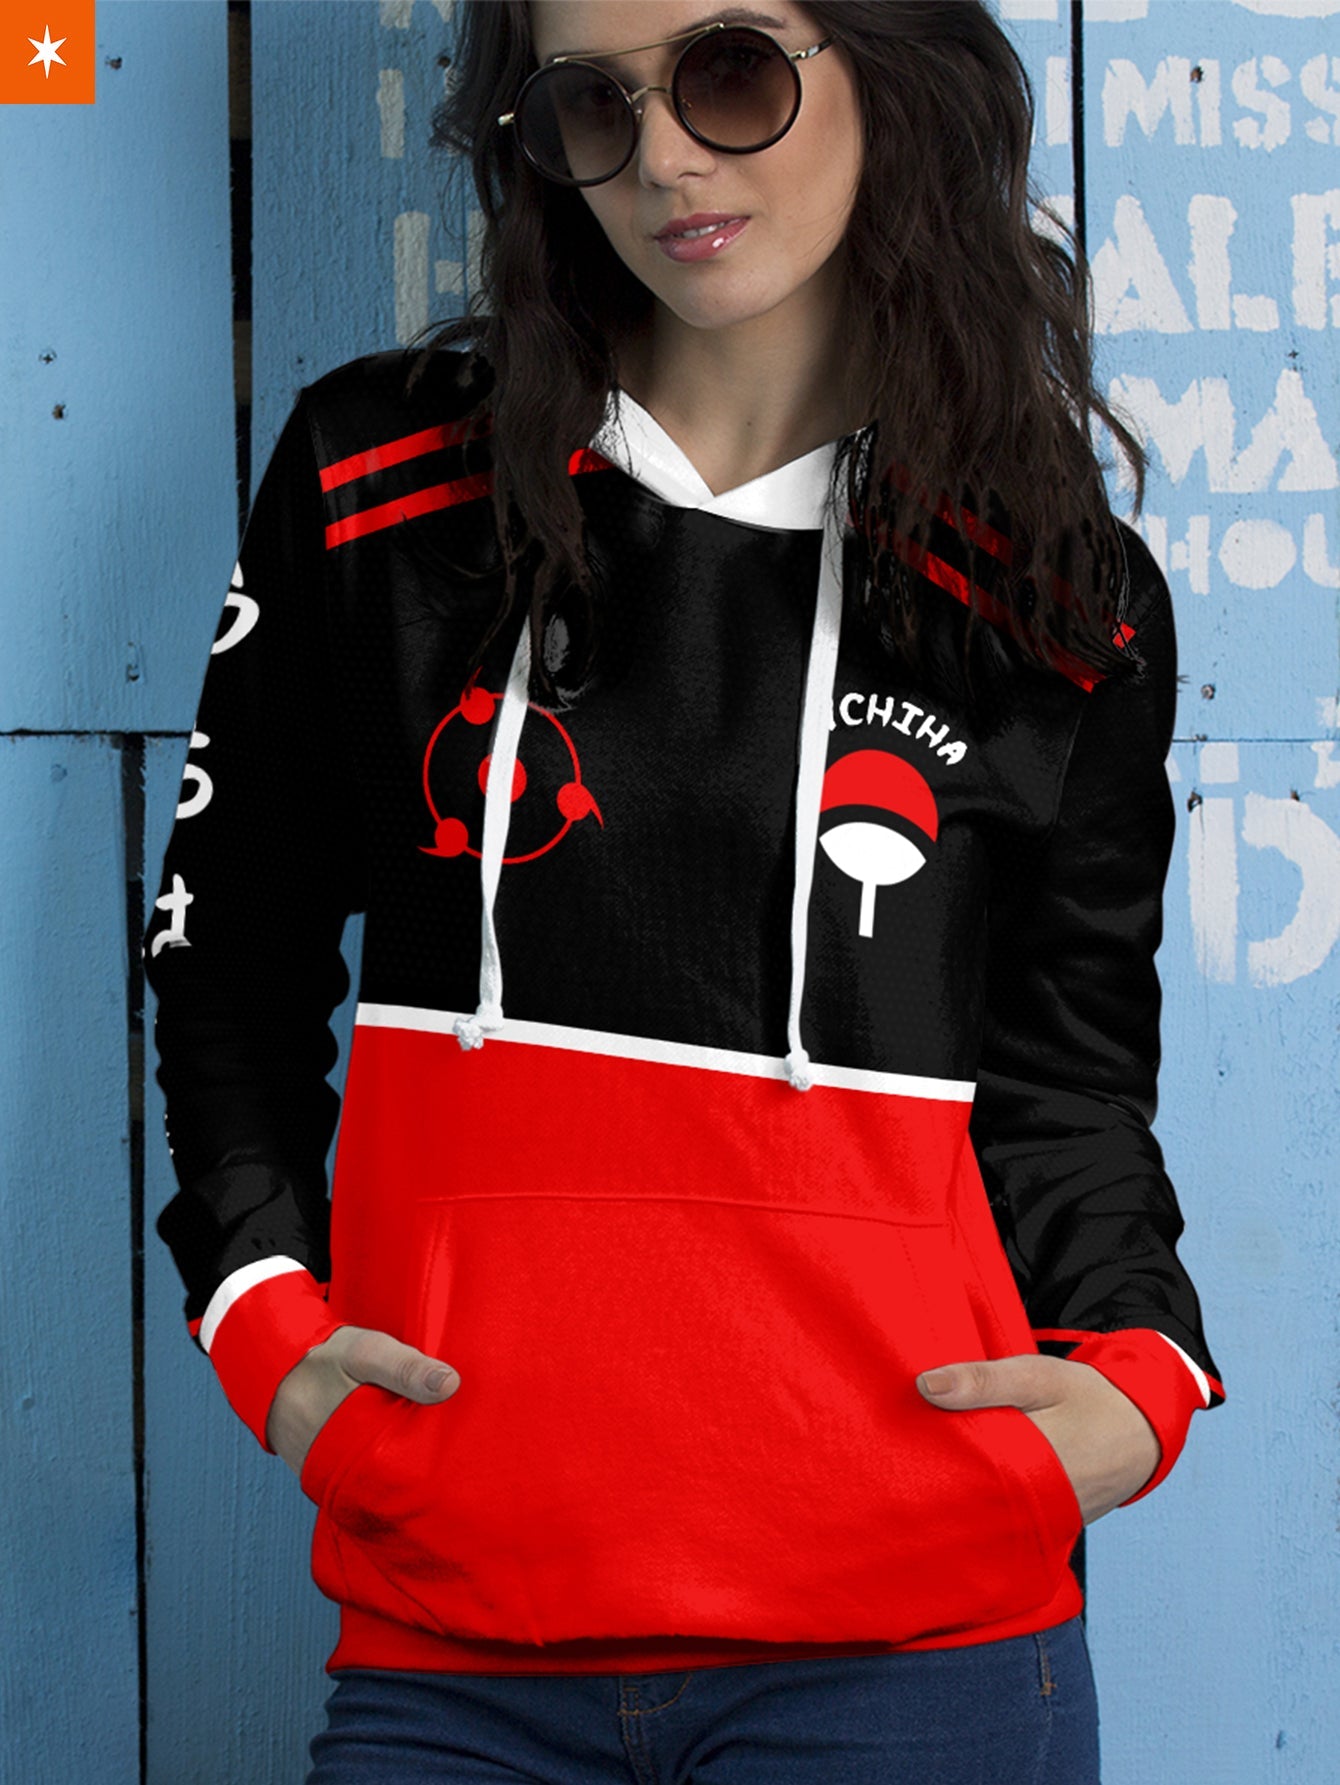 Fandomaniax - Personalized Noble Uchiha Clan Unisex Pullover Hoodie